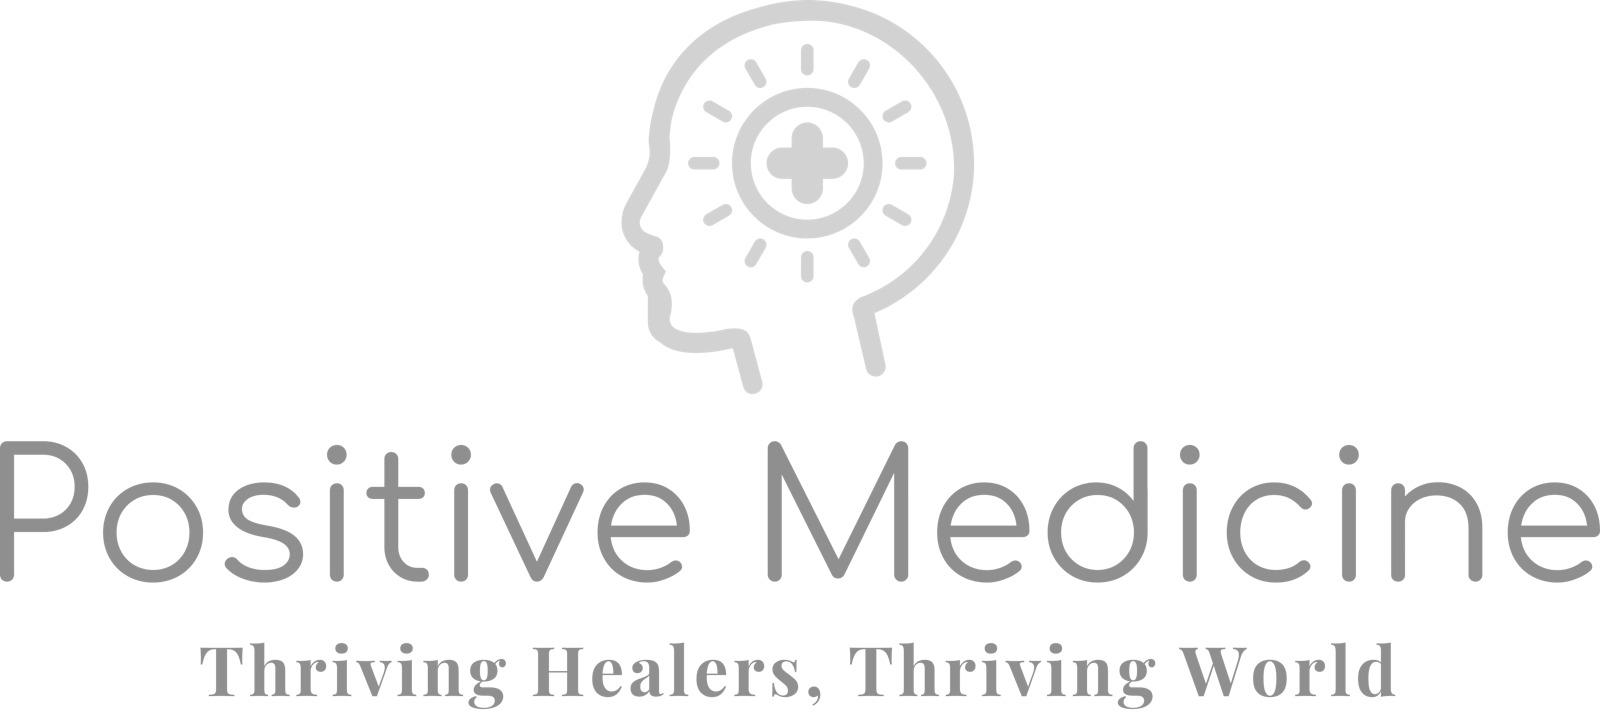 An introduction to the field of Positive Medicine